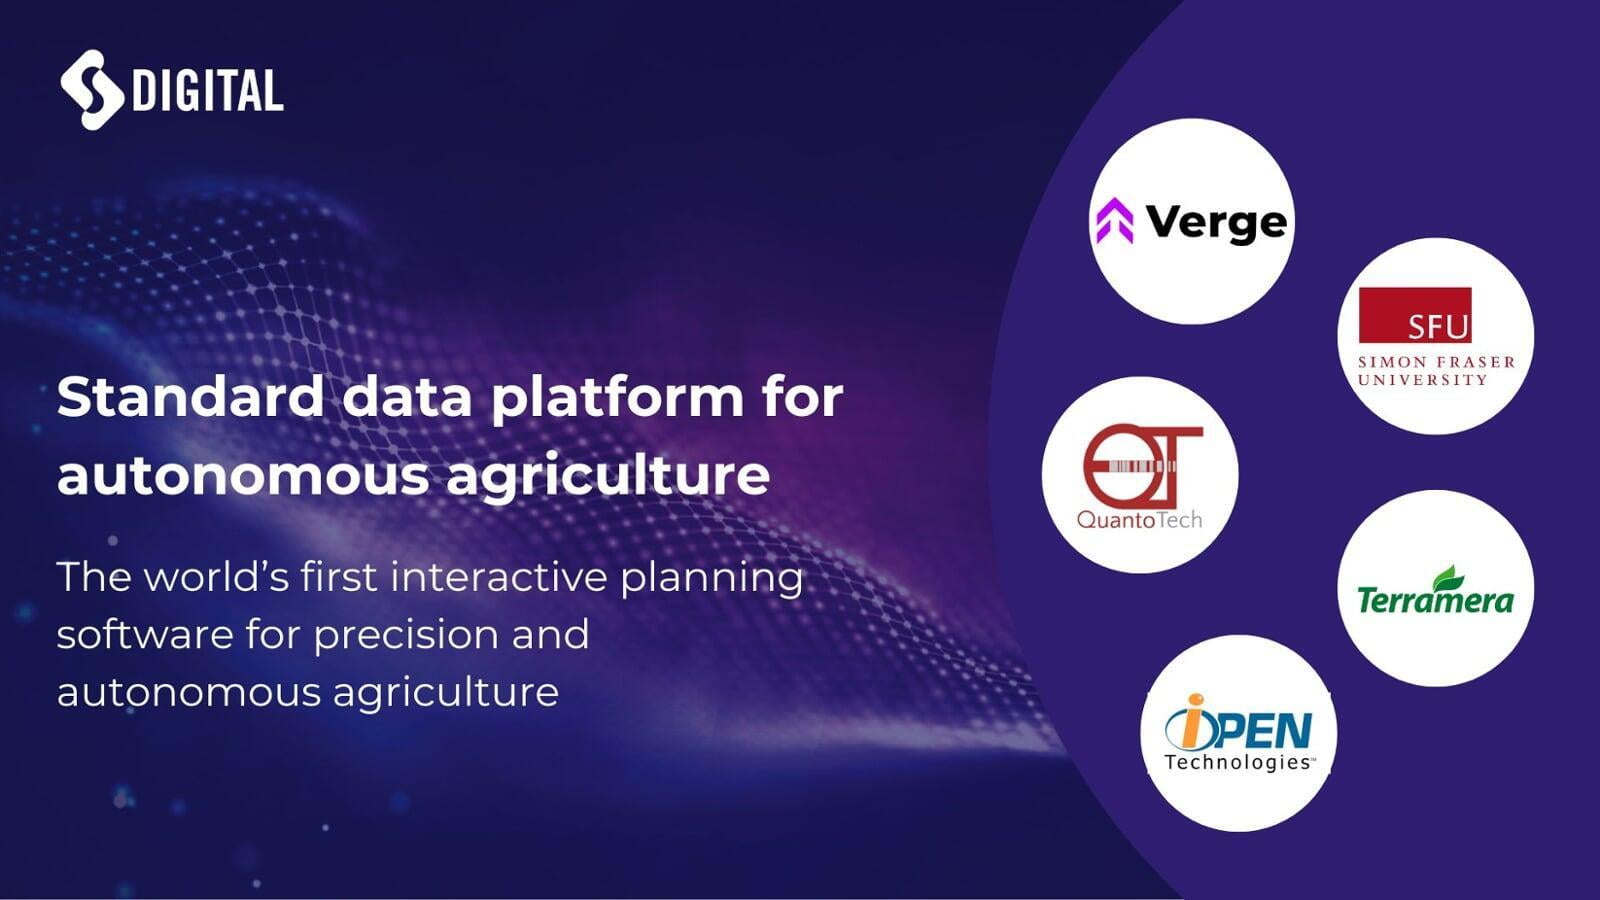 Digital Technology Supercluster Invests in Autonomous Agriculture for Smarter, More Sustainable Food Production